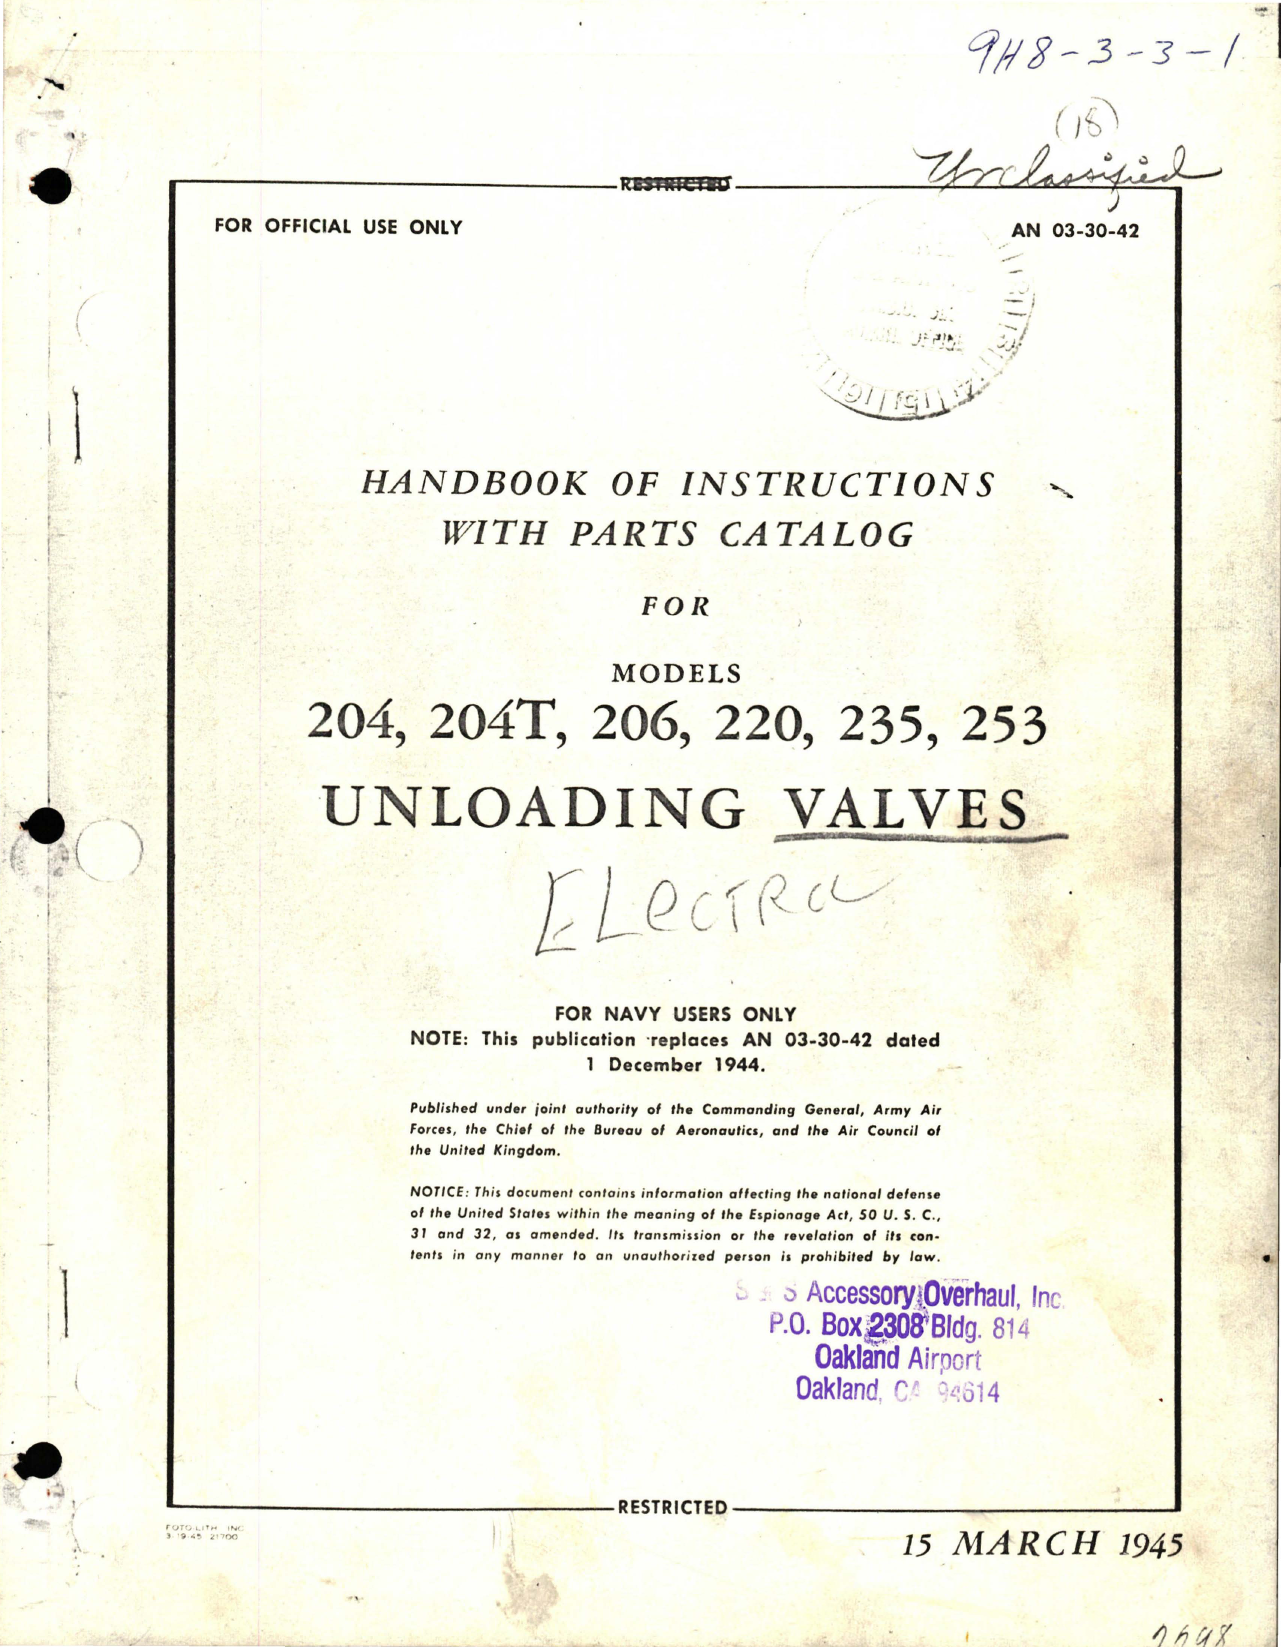 Sample page 1 from AirCorps Library document: Instructions with Parts Catalog for Unloading Valves - 204, 204T, 206, 220, 235, and 253